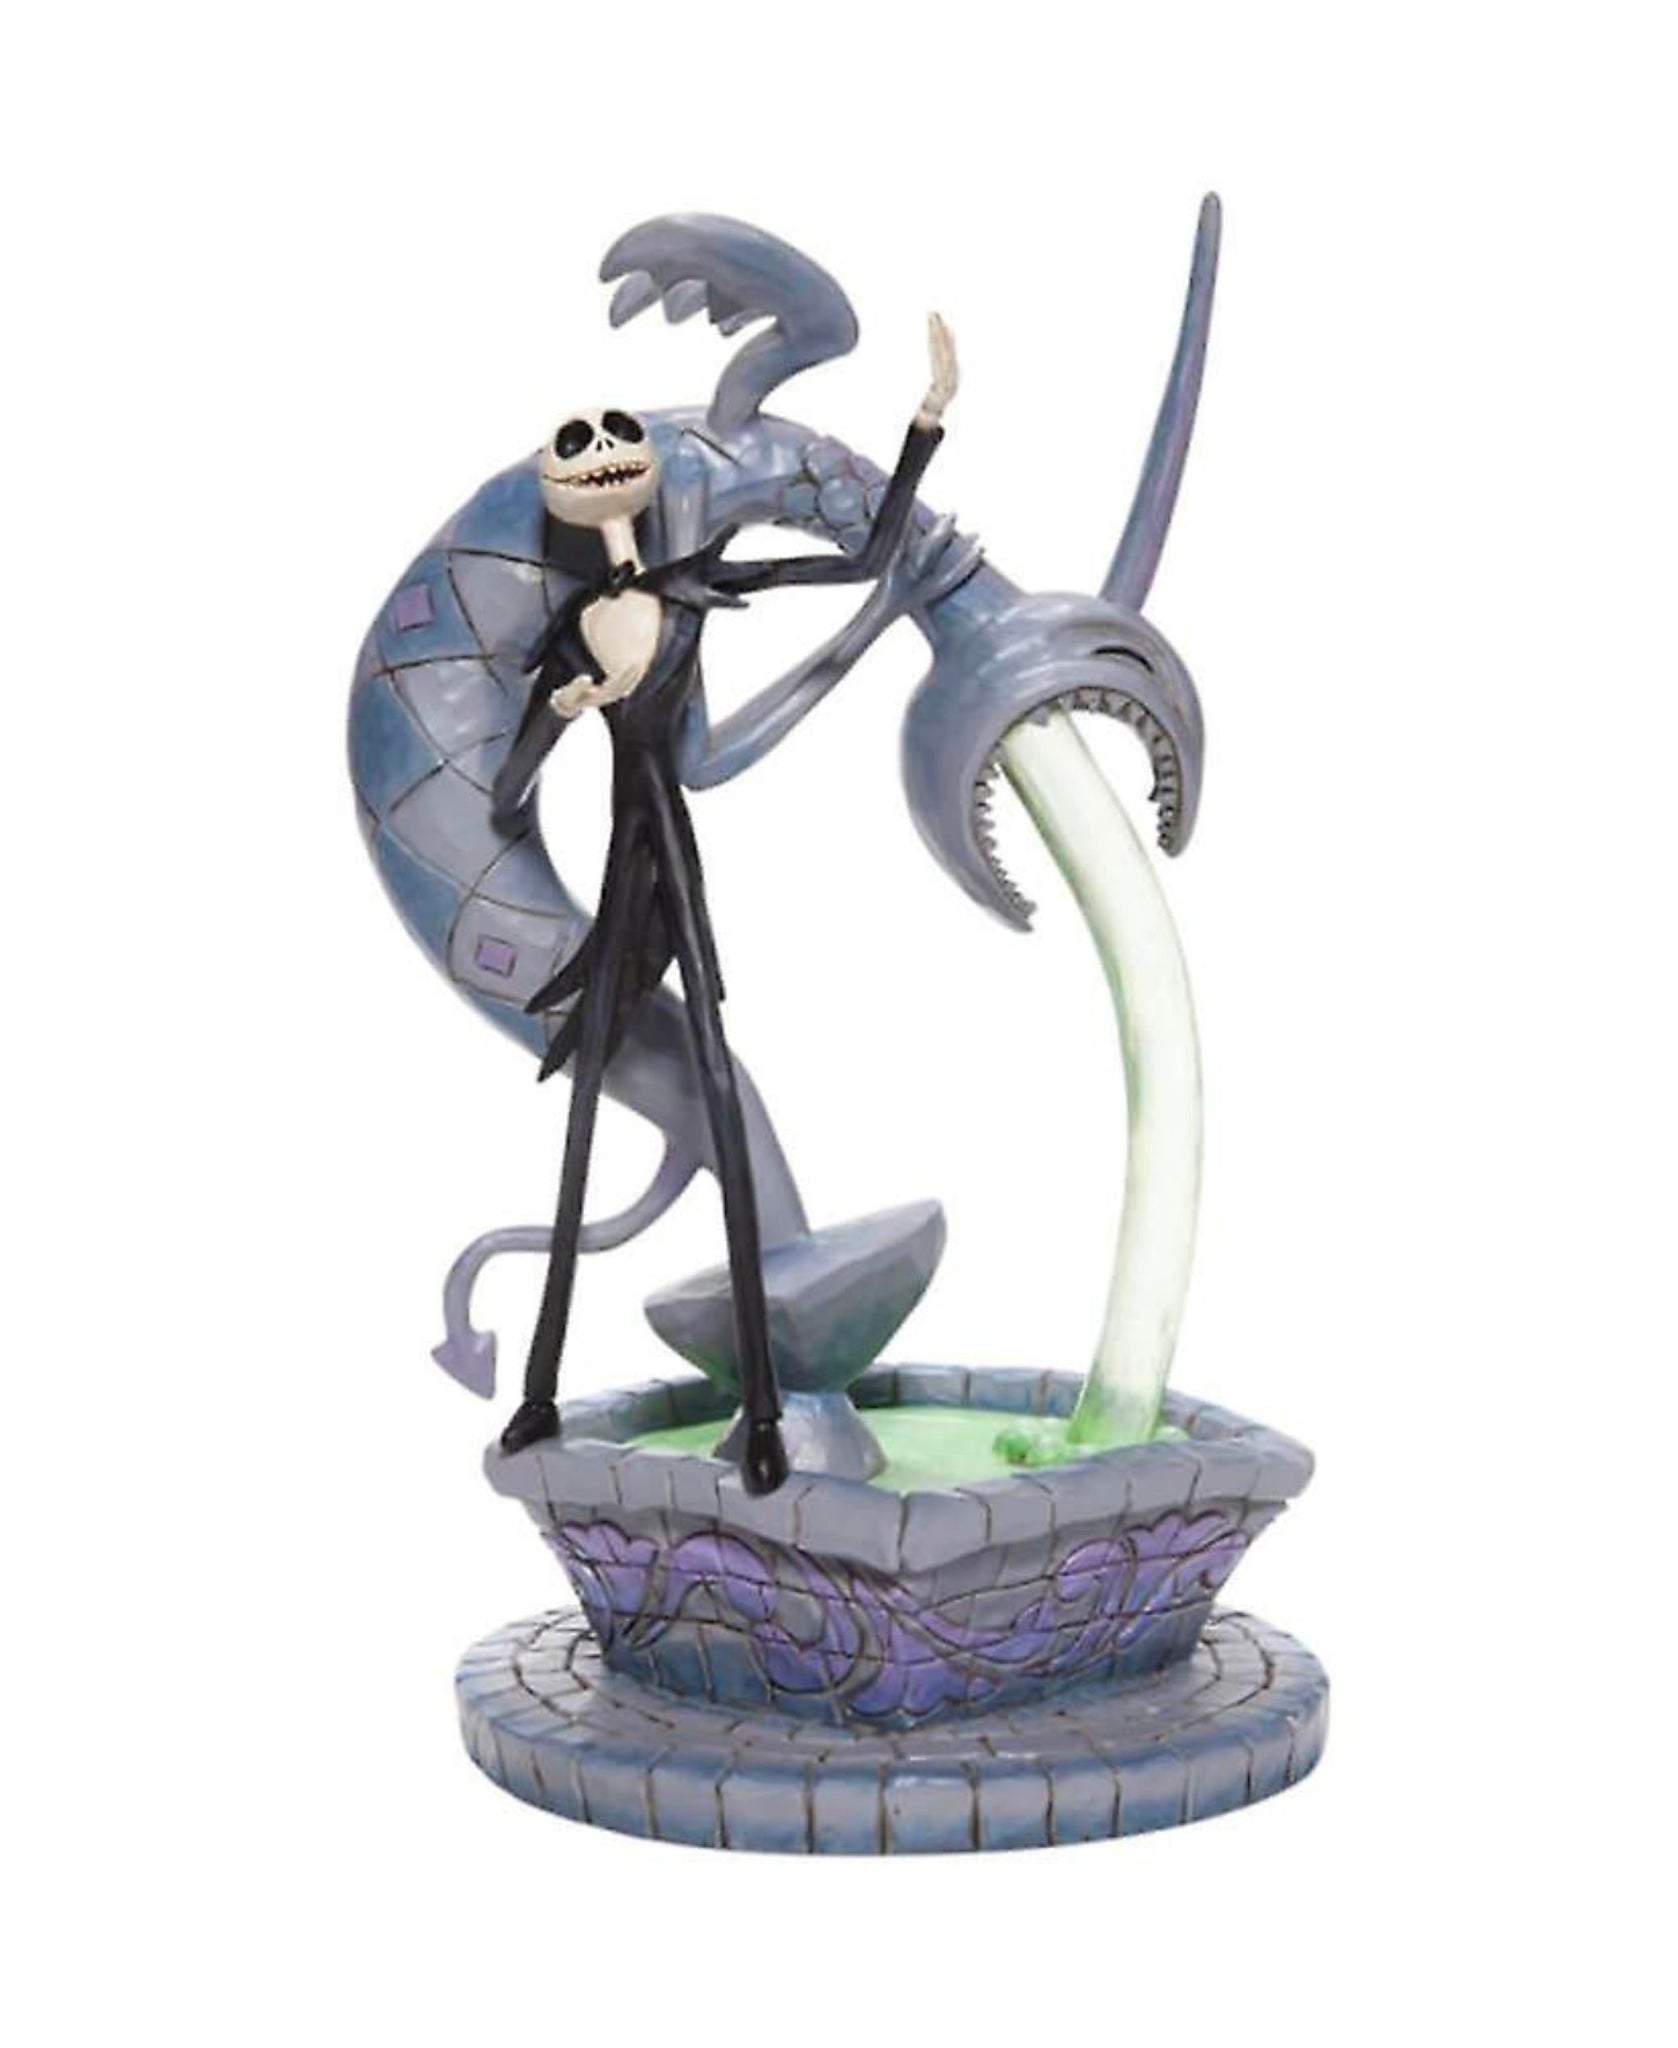 Jim Shore 'Soulful Soliloquy' Nightmare Before Christmas -- Disney Traditions